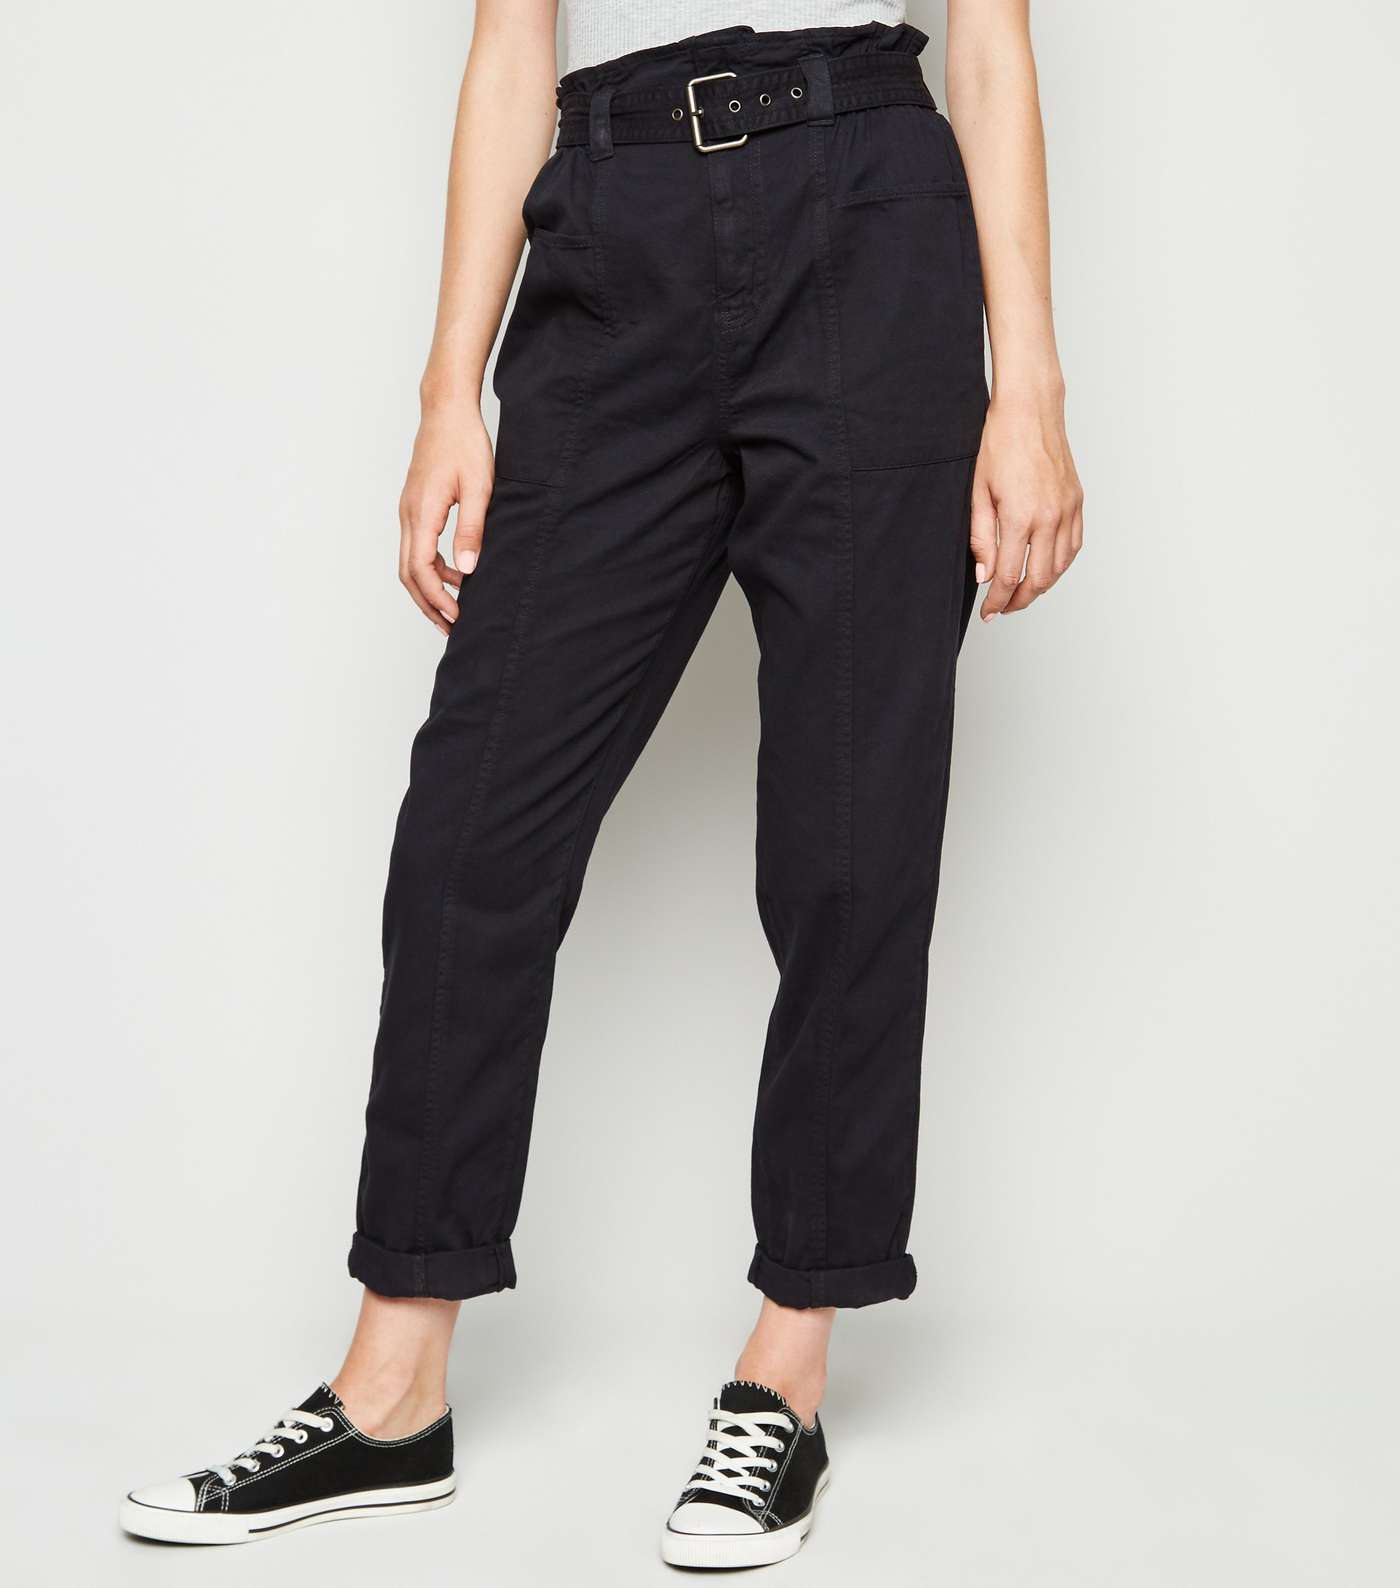 Black Denim High Waist Belted Utility Trousers Image 2